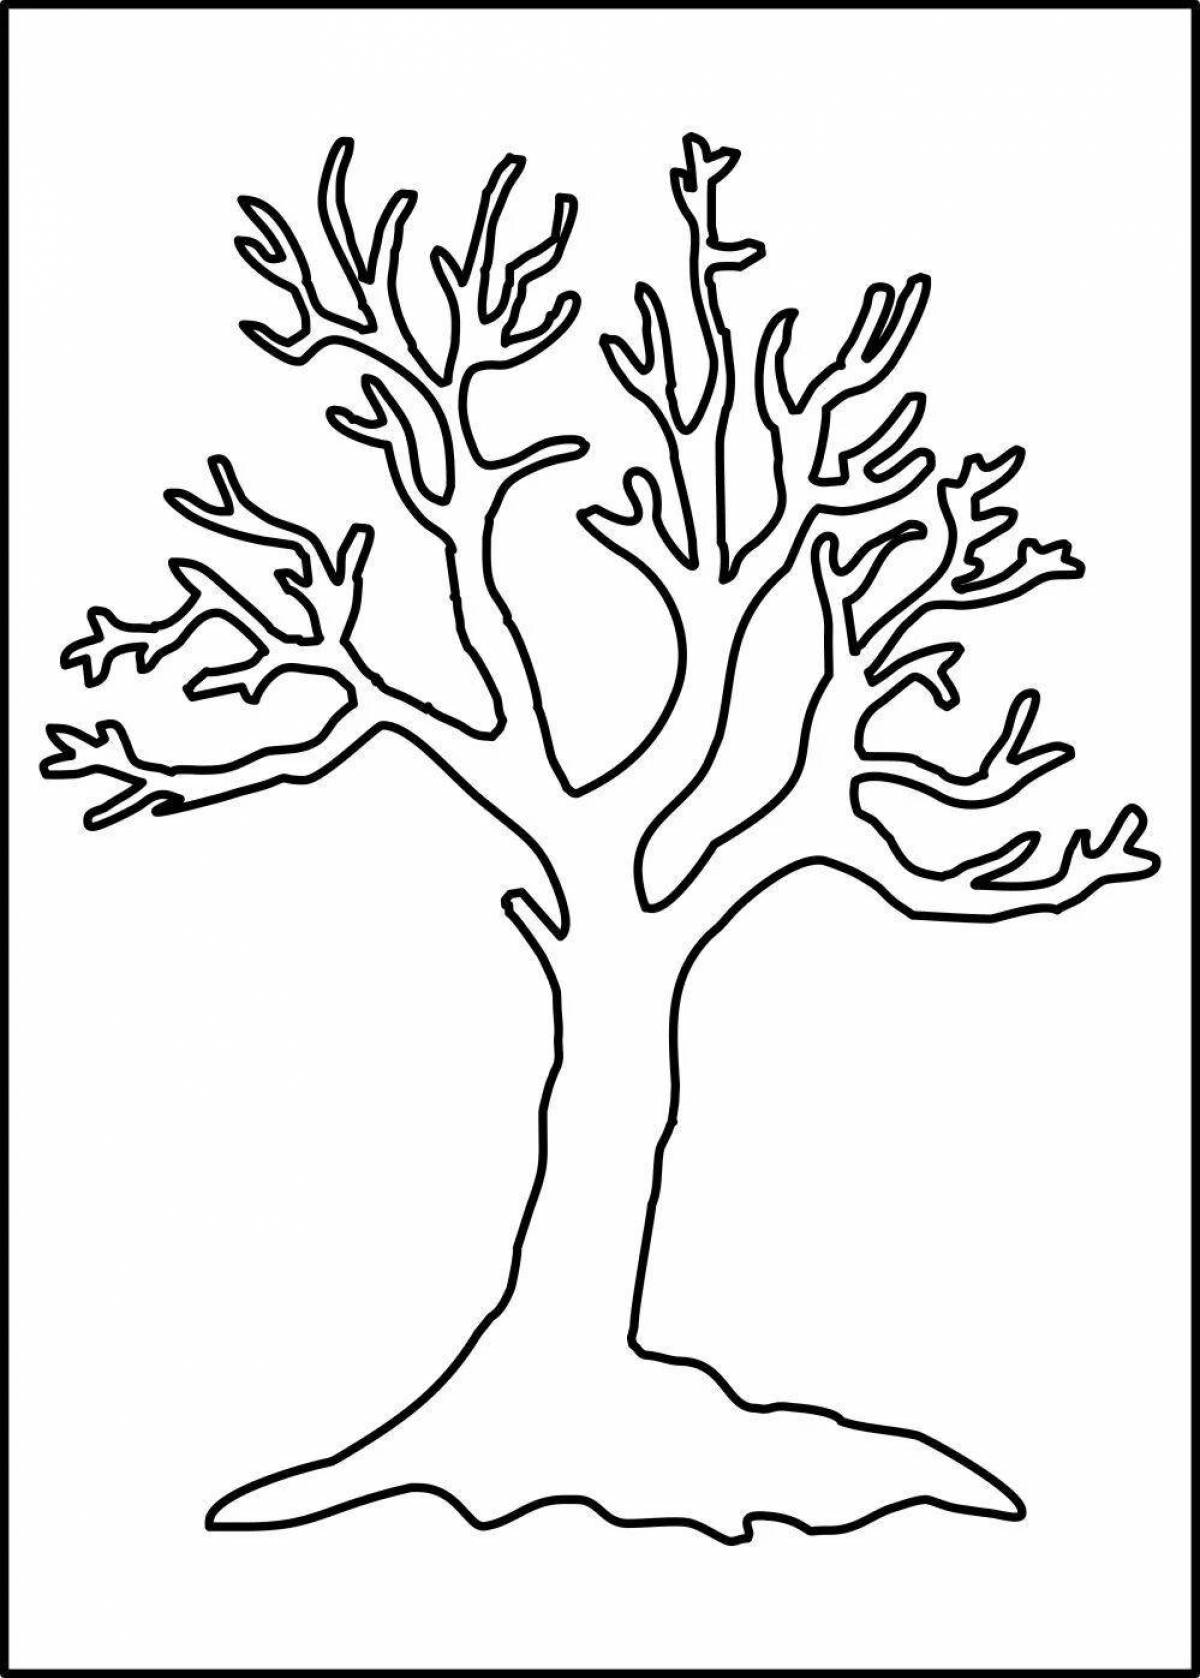 Amazing coloring pages of trees in the snow